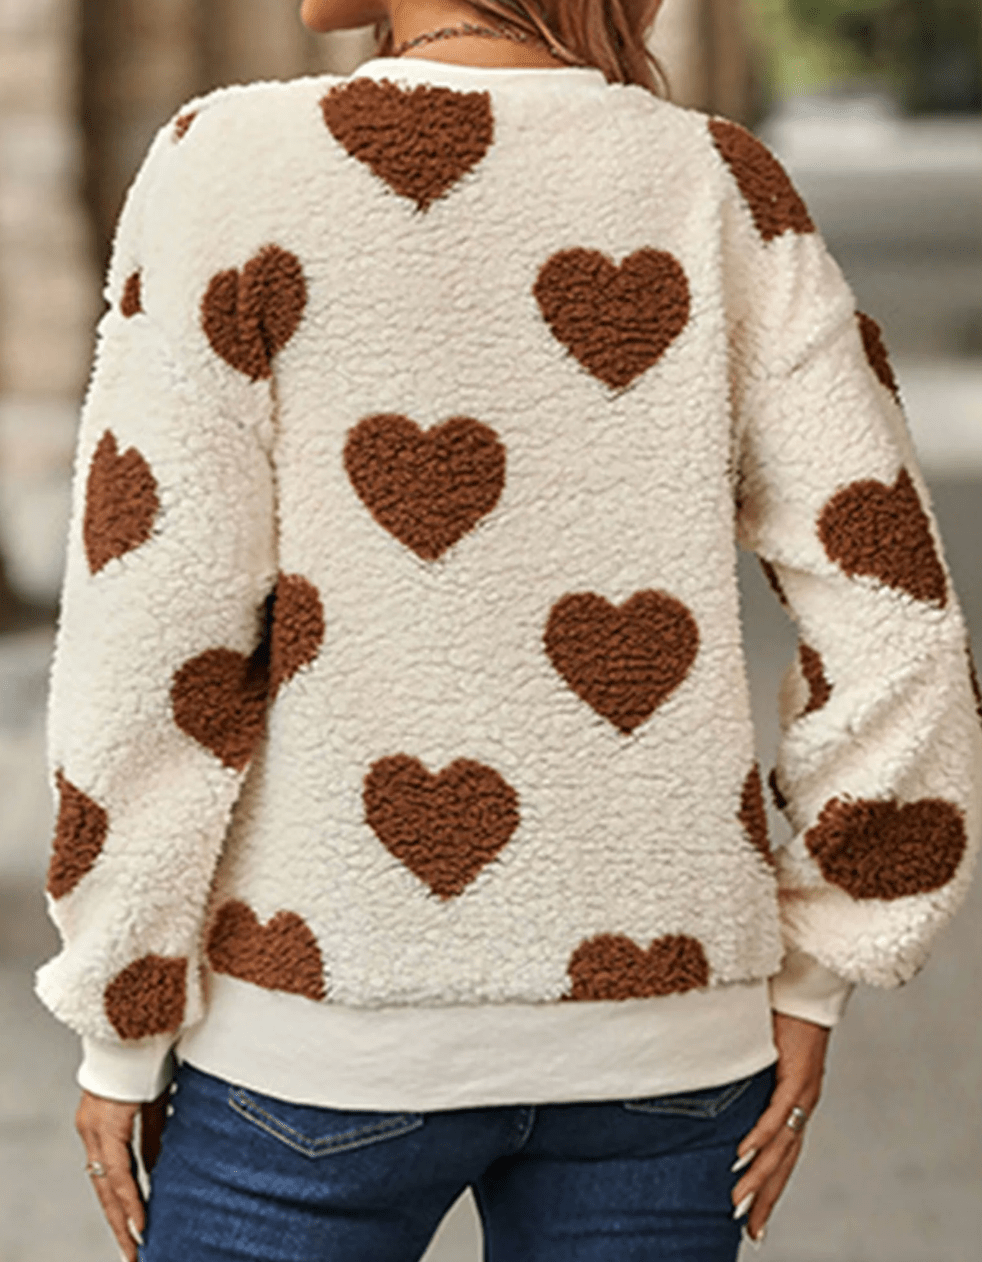 Shermie Heart Print Pullover Sweater